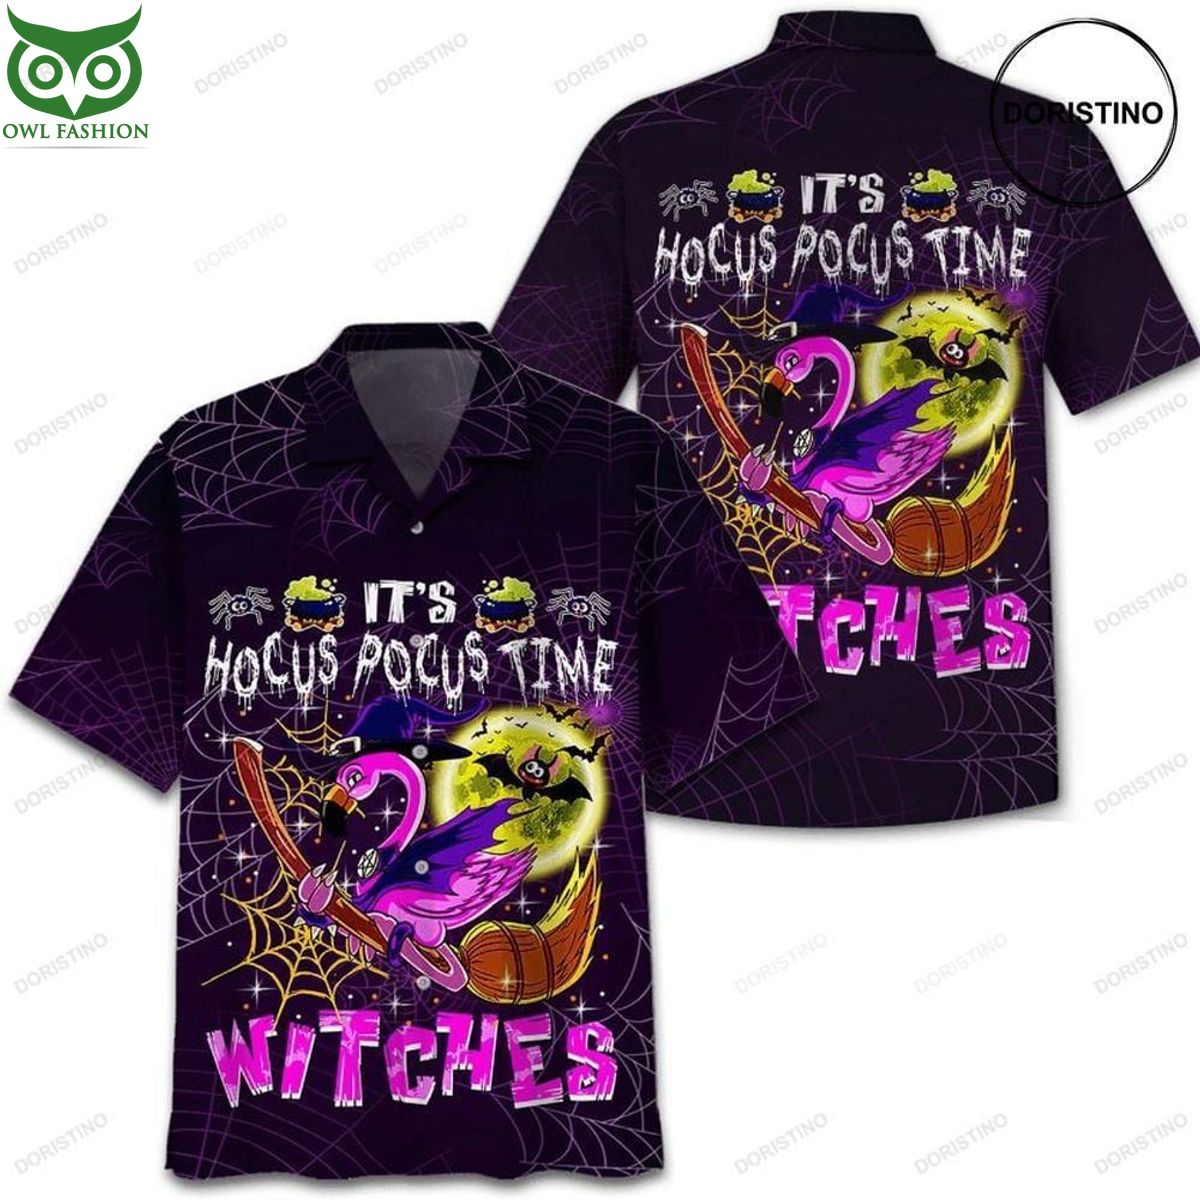 Resger Hocus Pocus Witches Hawaiian Shirt Is this your new friend?